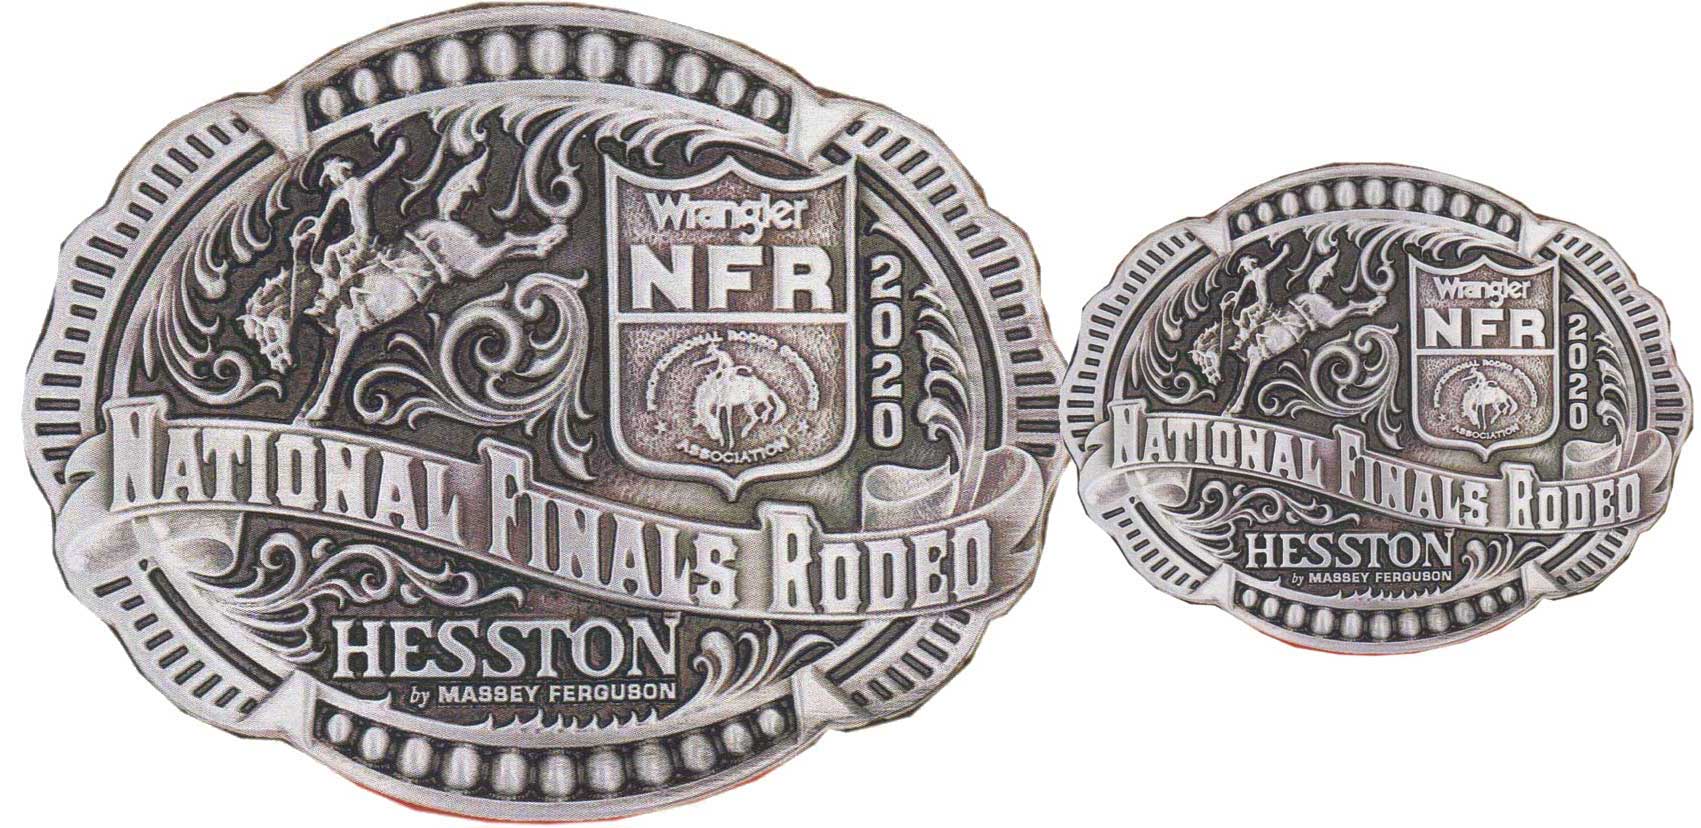 HESSTON BUCKLE 2005 Youth Small ***NFR*** NATIONAL FINALS RODEO   NEW!!! 